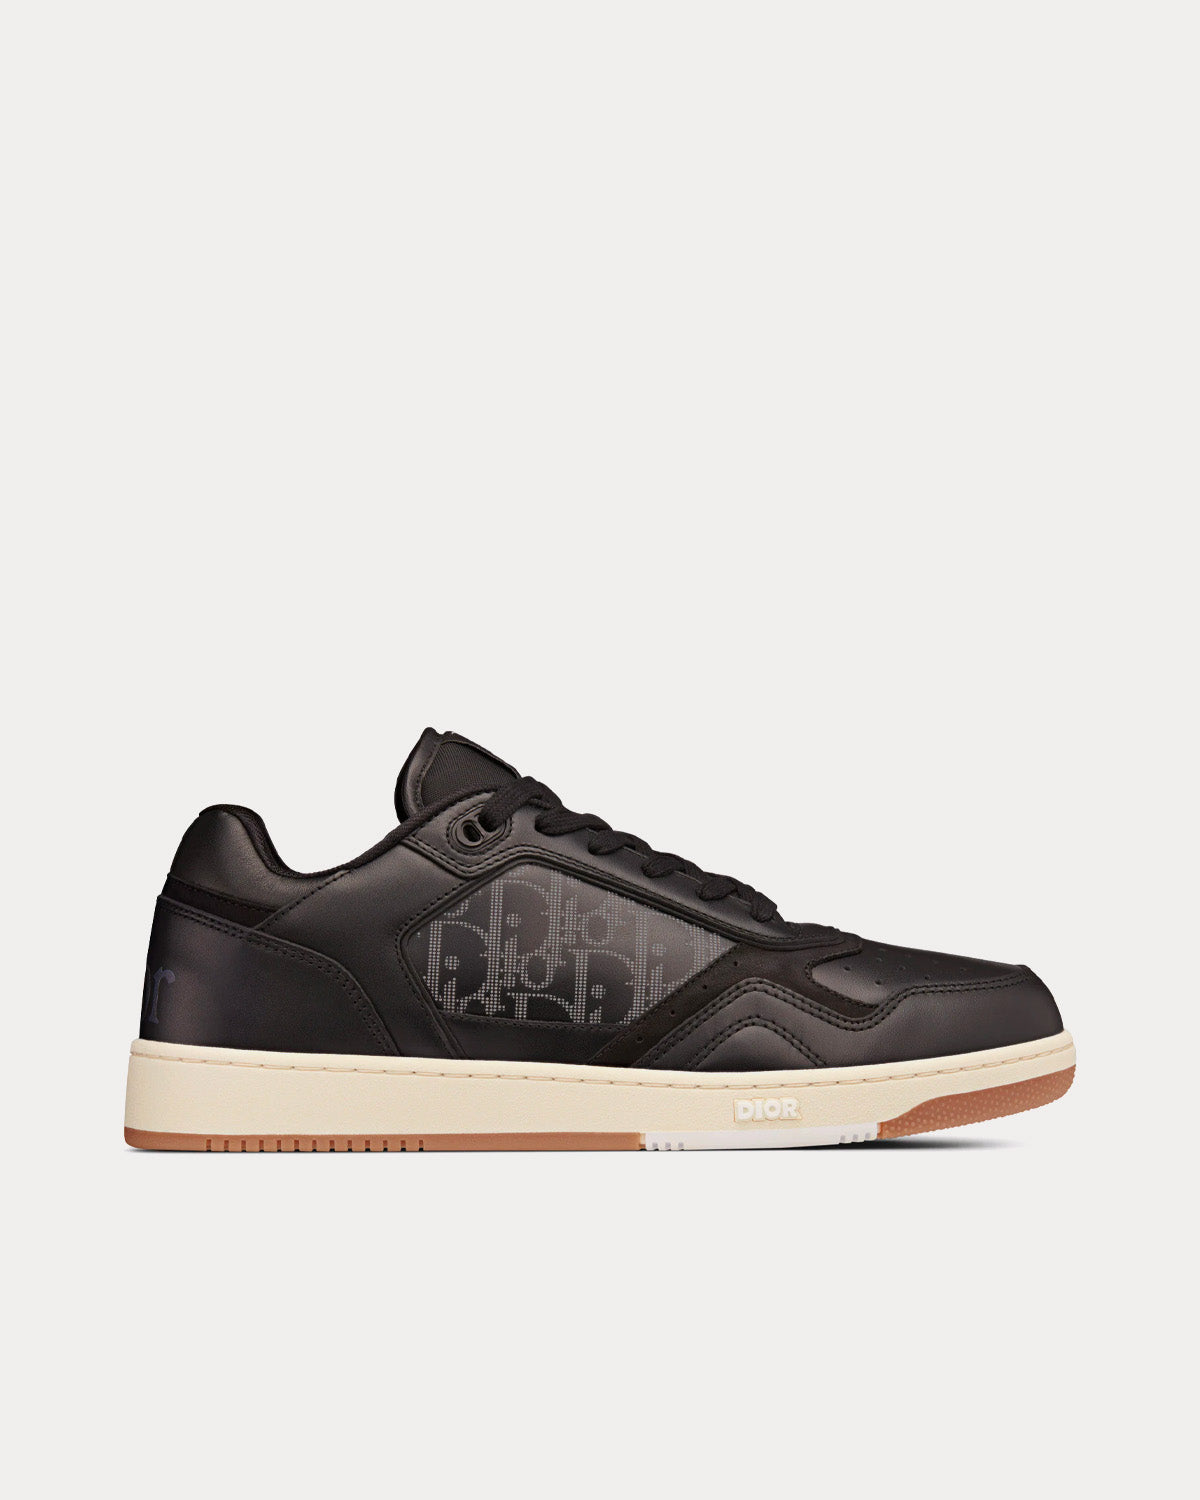 Dior x ERL - B27 Black Smooth Calfskin and Dior Oblique Galaxy Leather Low Top Sneakers